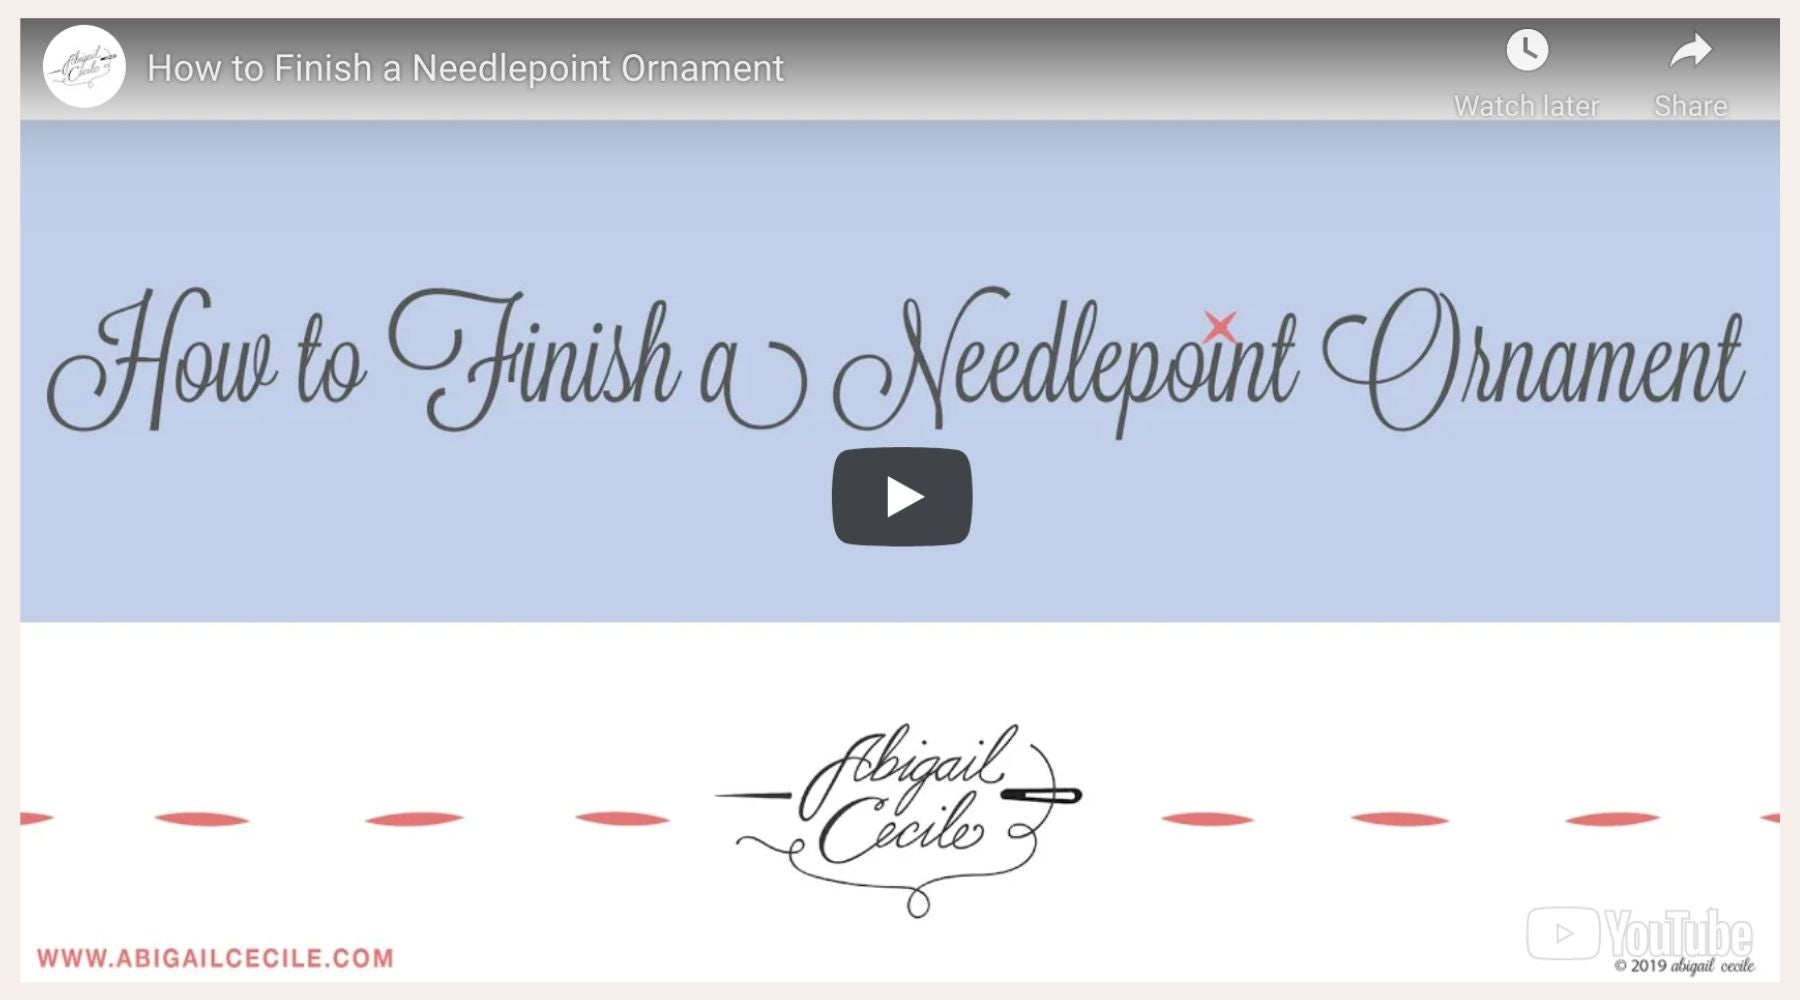 The opening slide to the video: How to Finish a Needlepoint Ornament.